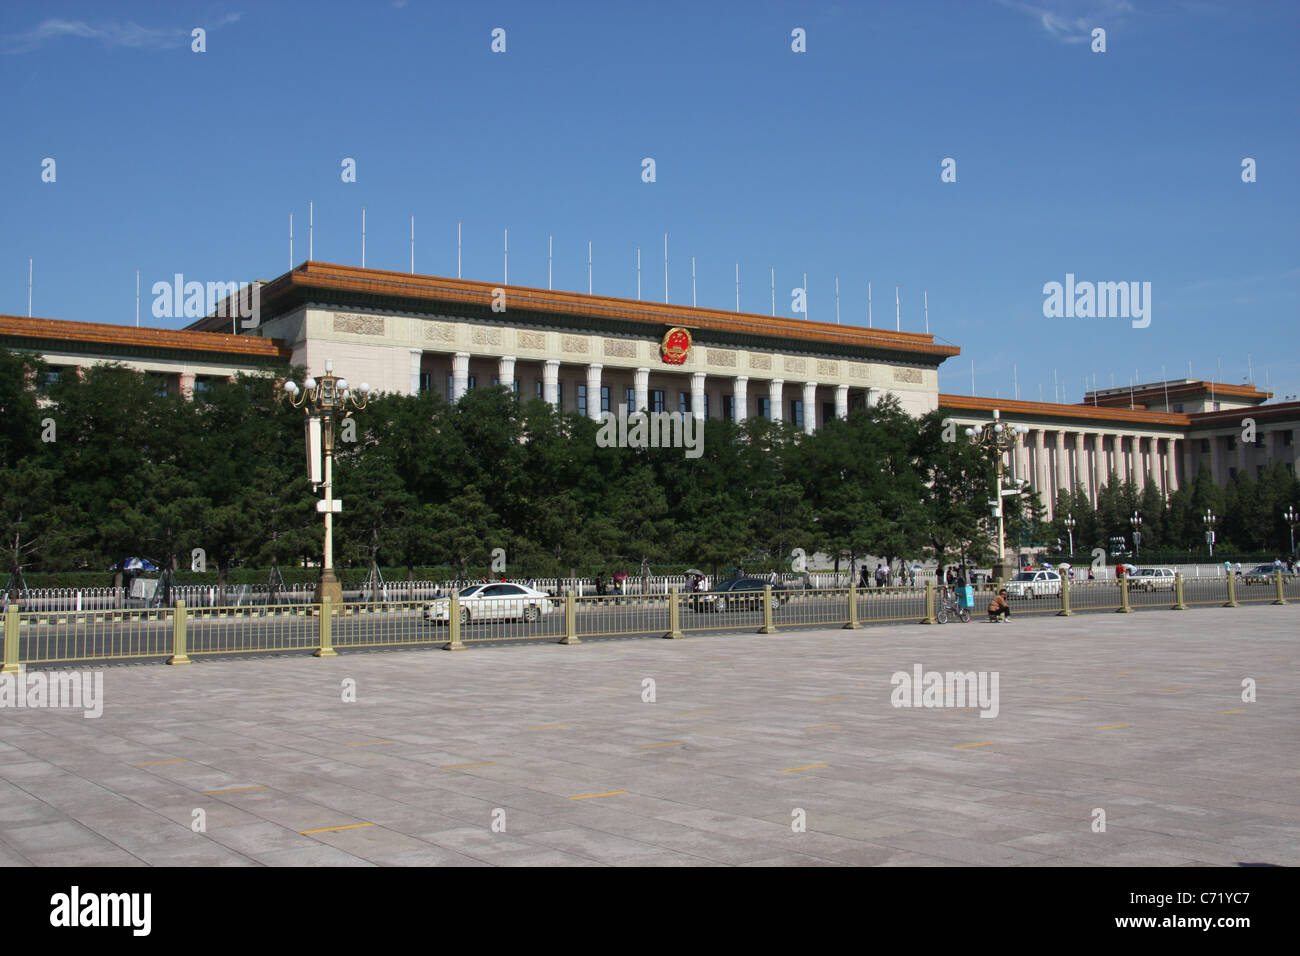 Great Hall of the People (National Assembly Building), Tiananmen Square, Beijing, China. Stock Photo